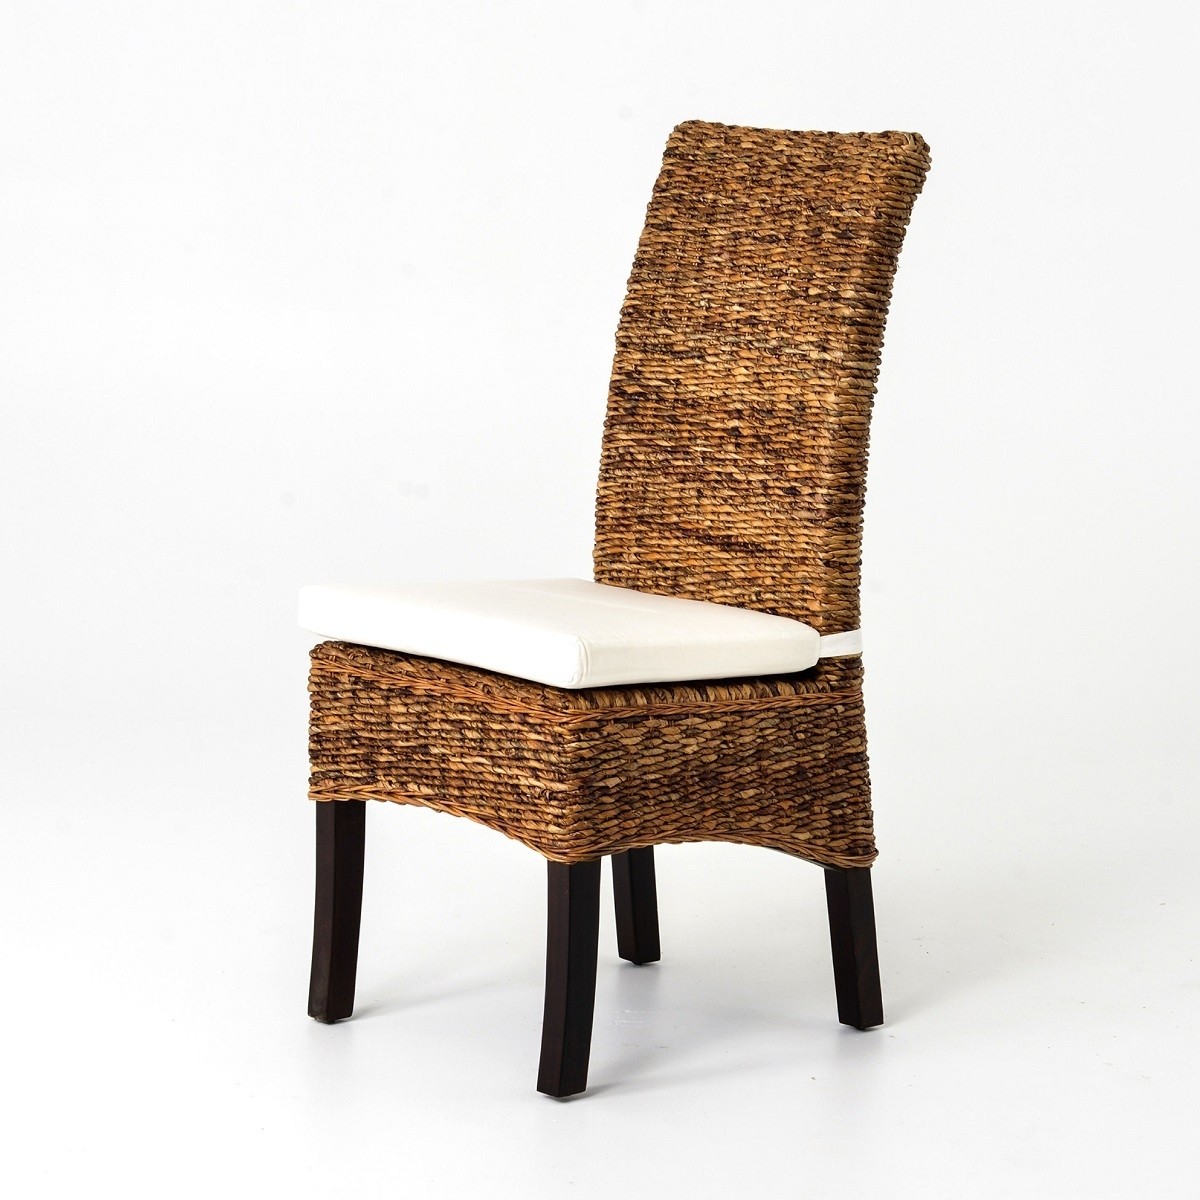 Banana leaf woven side chair with cushion seagrass